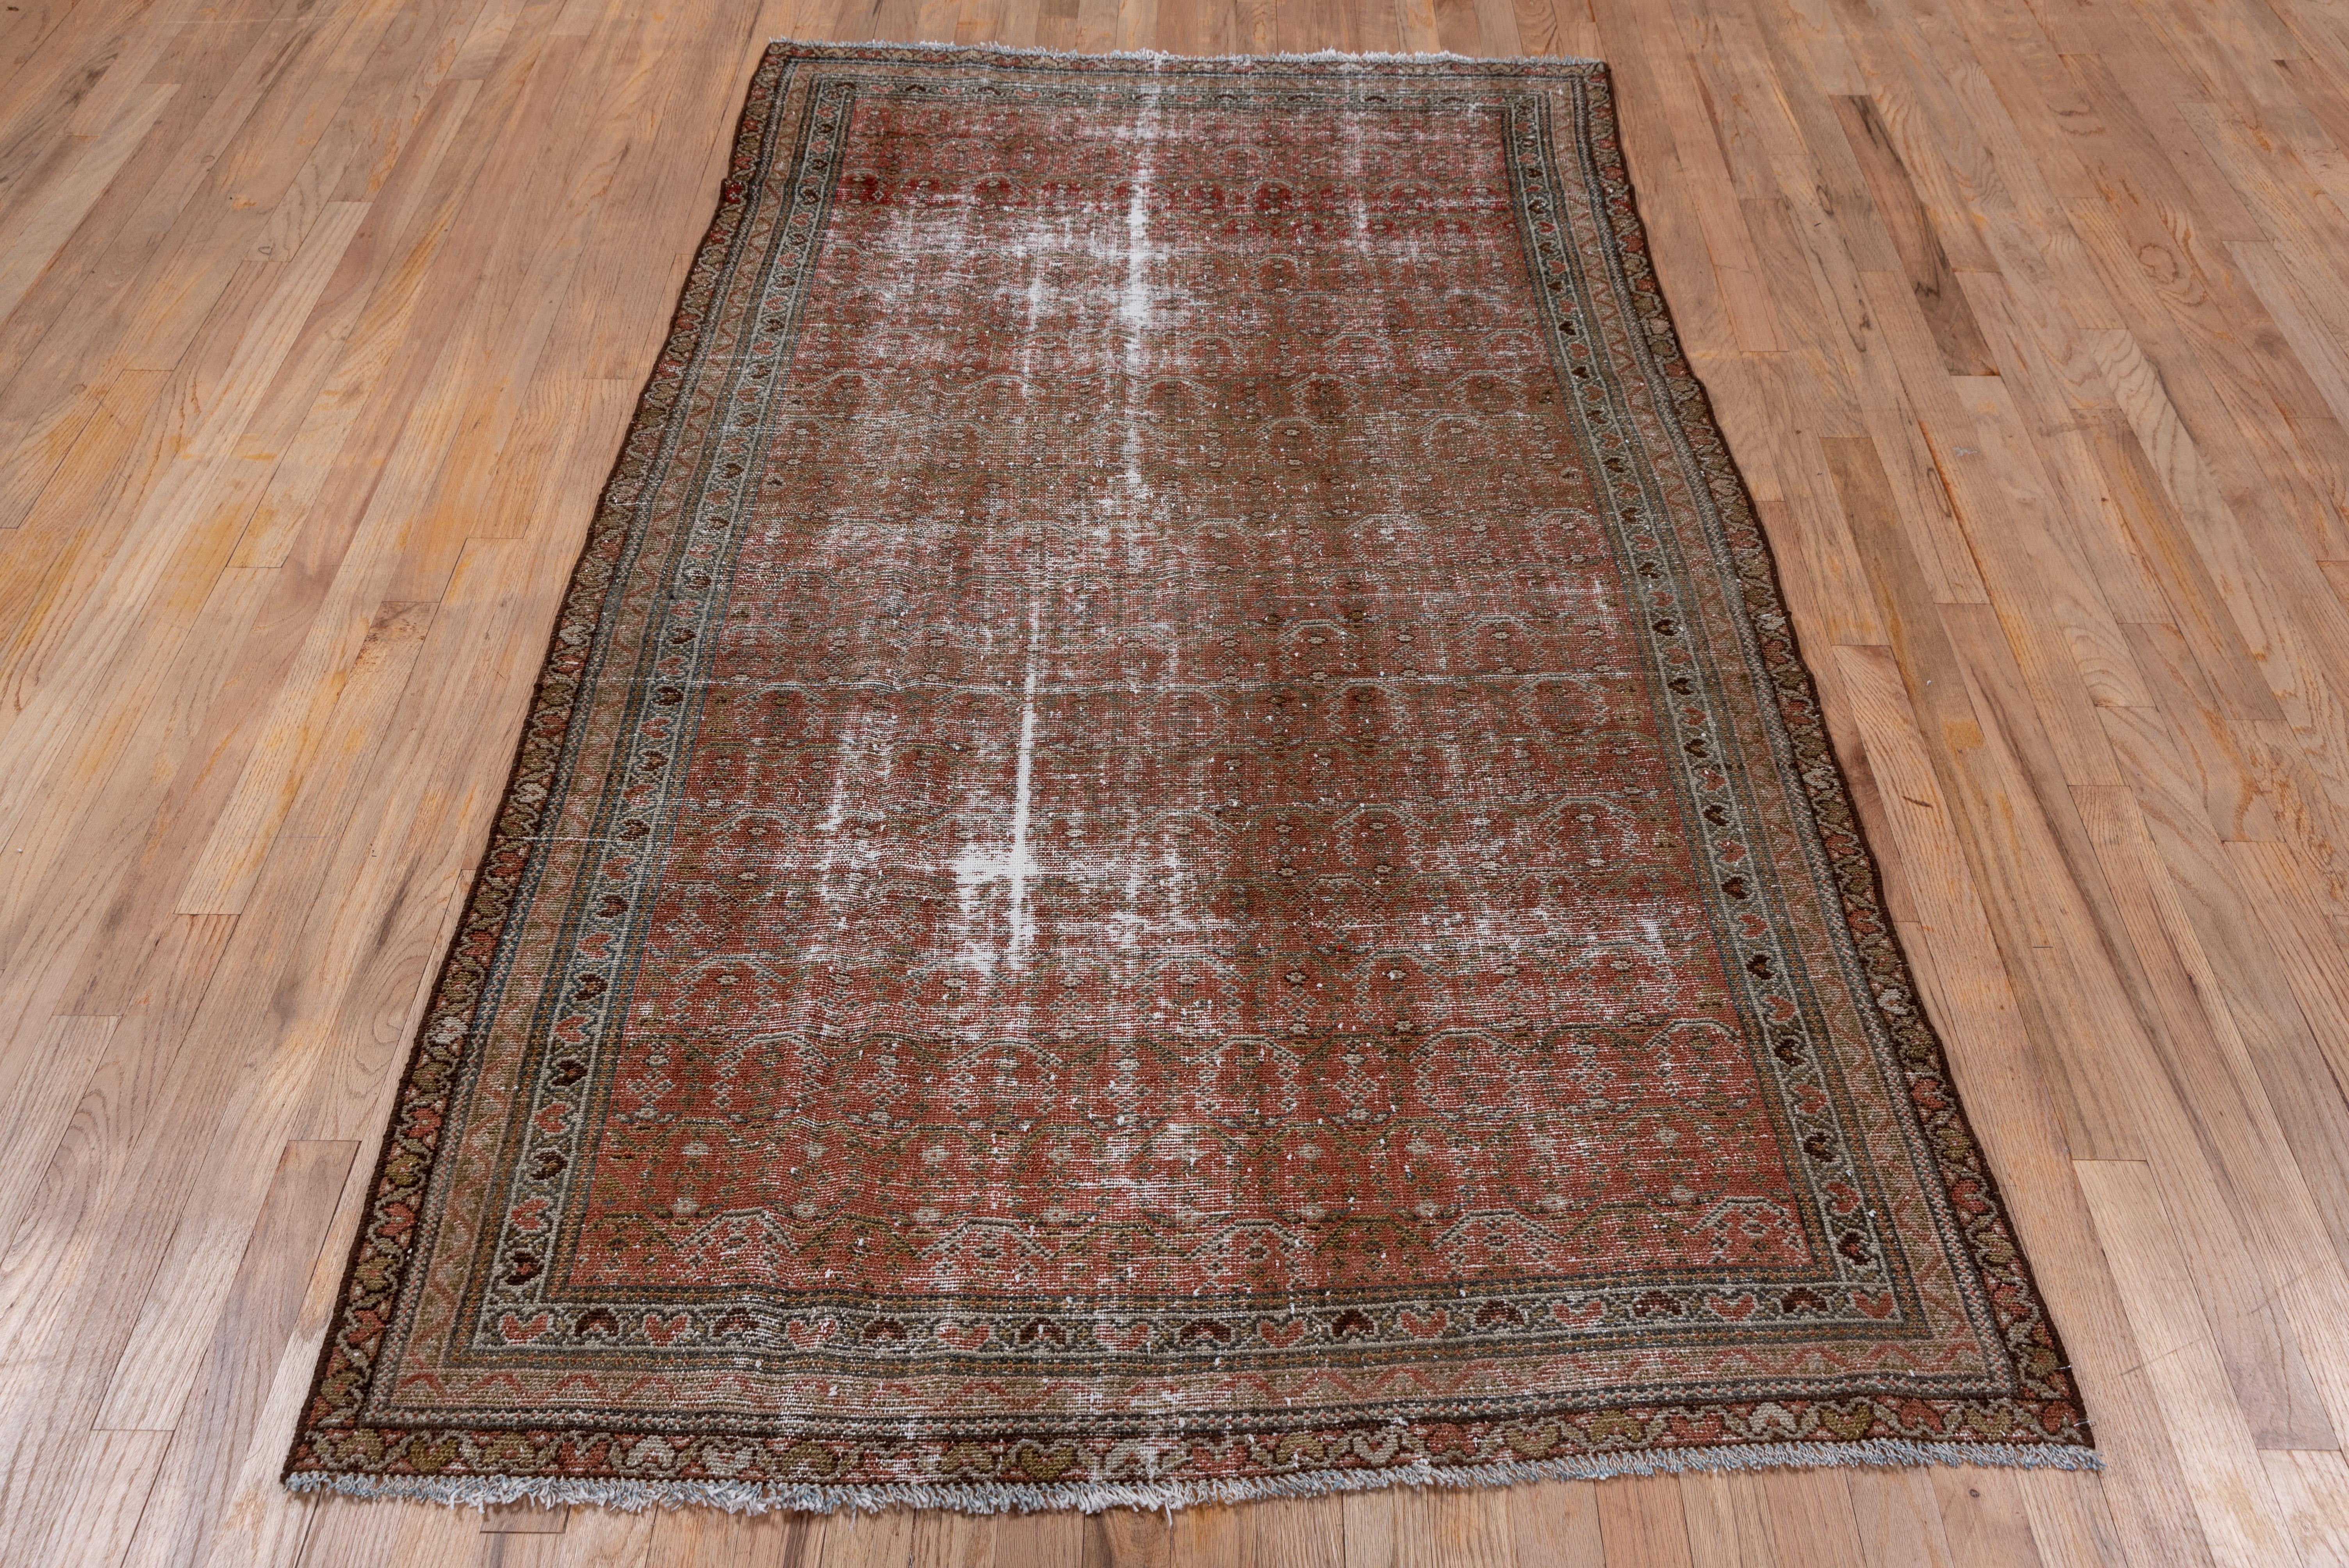 This beautiful persian Malayer rug is distressed, but still in good condition. It has a medium weave that shows offset rows of geometric paisleys on a coral and rust ground. Three narrow borders all show reversing fan palmettes in alternating